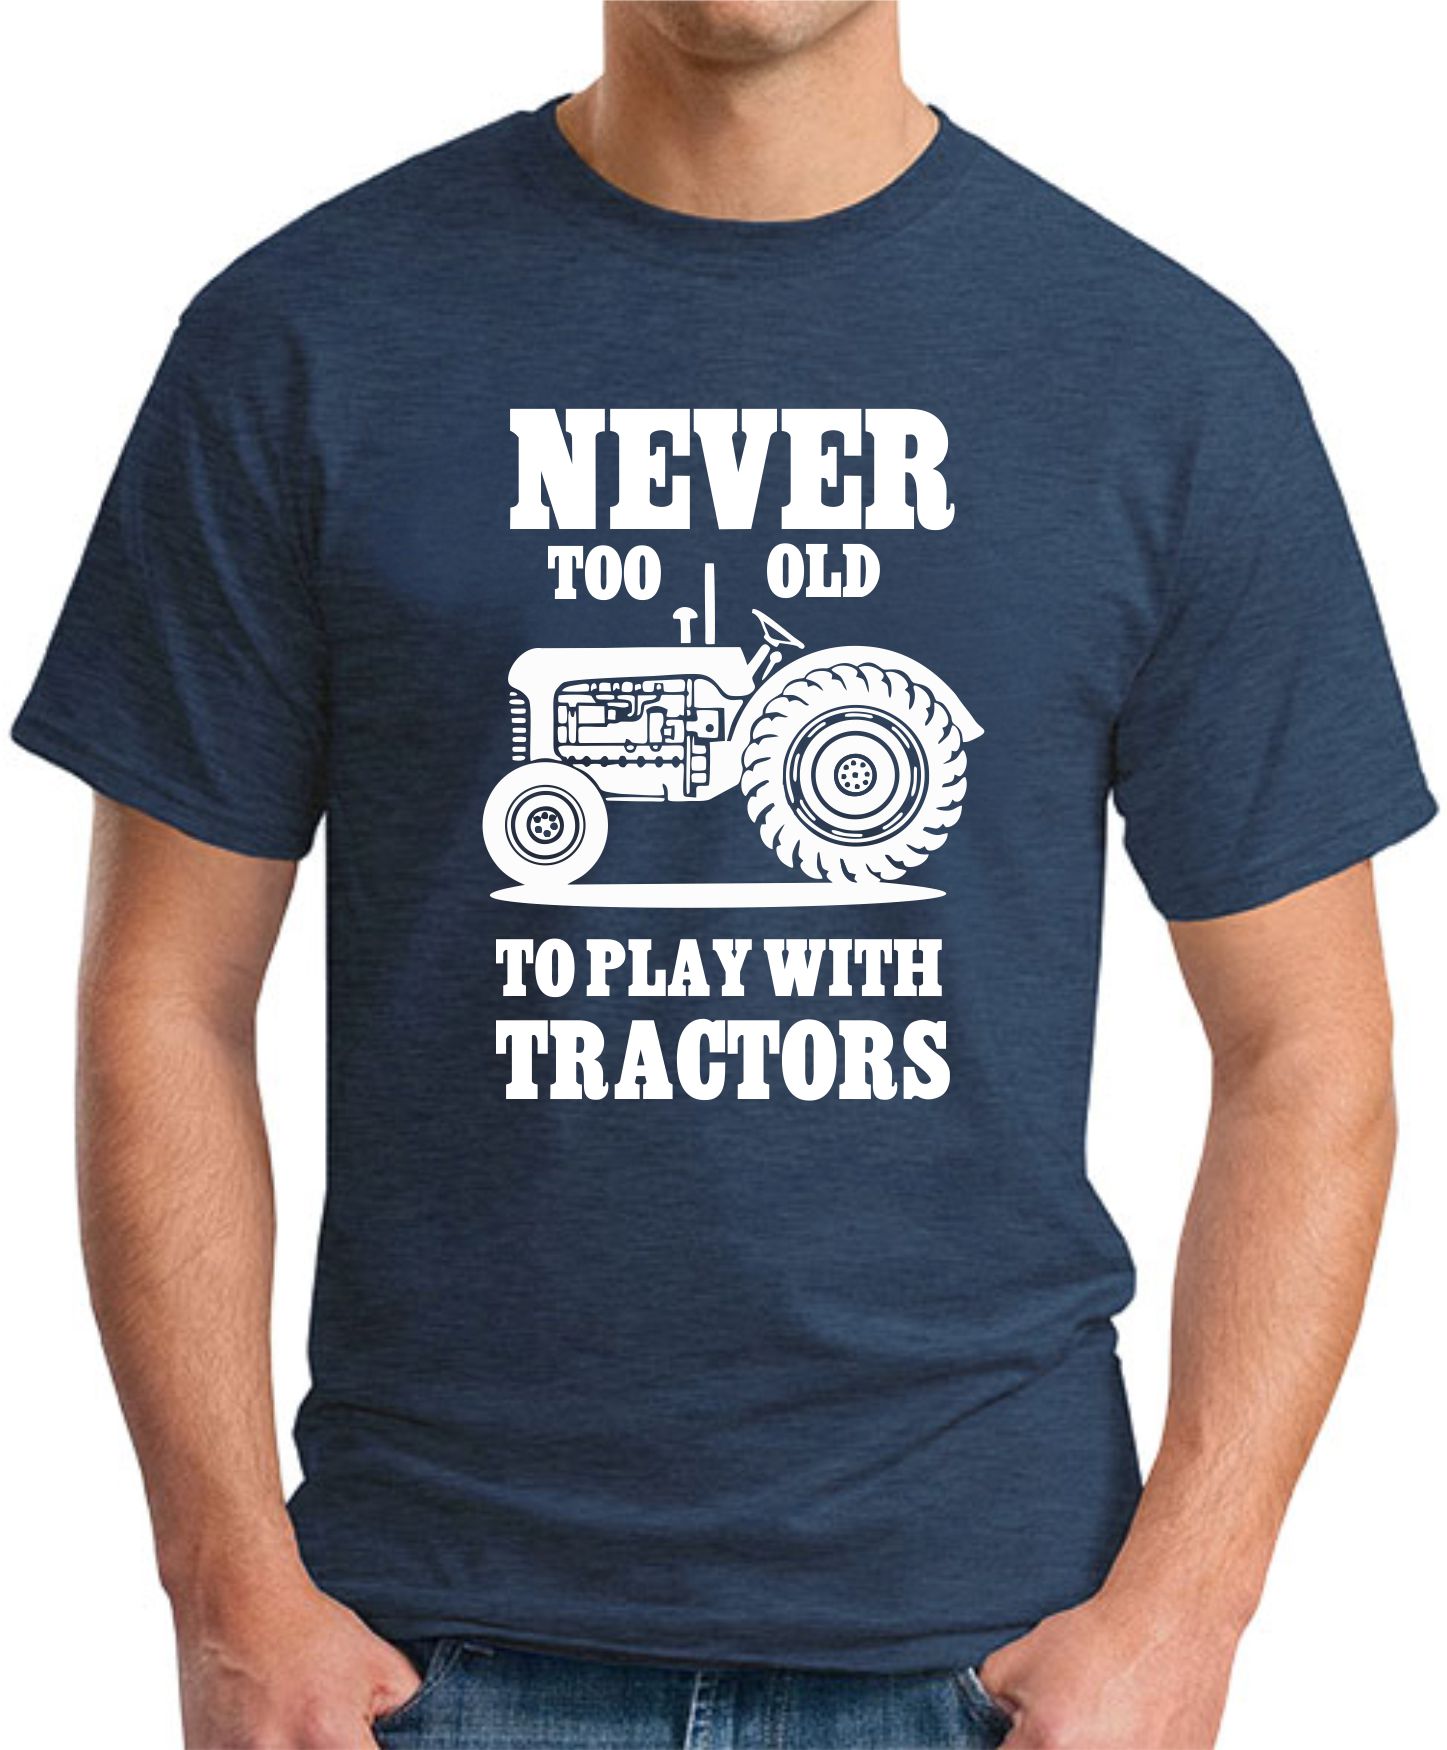 NEVER TOO OLD TO PLAY WITH TRACTORS T-SHIRT - GeekyTees